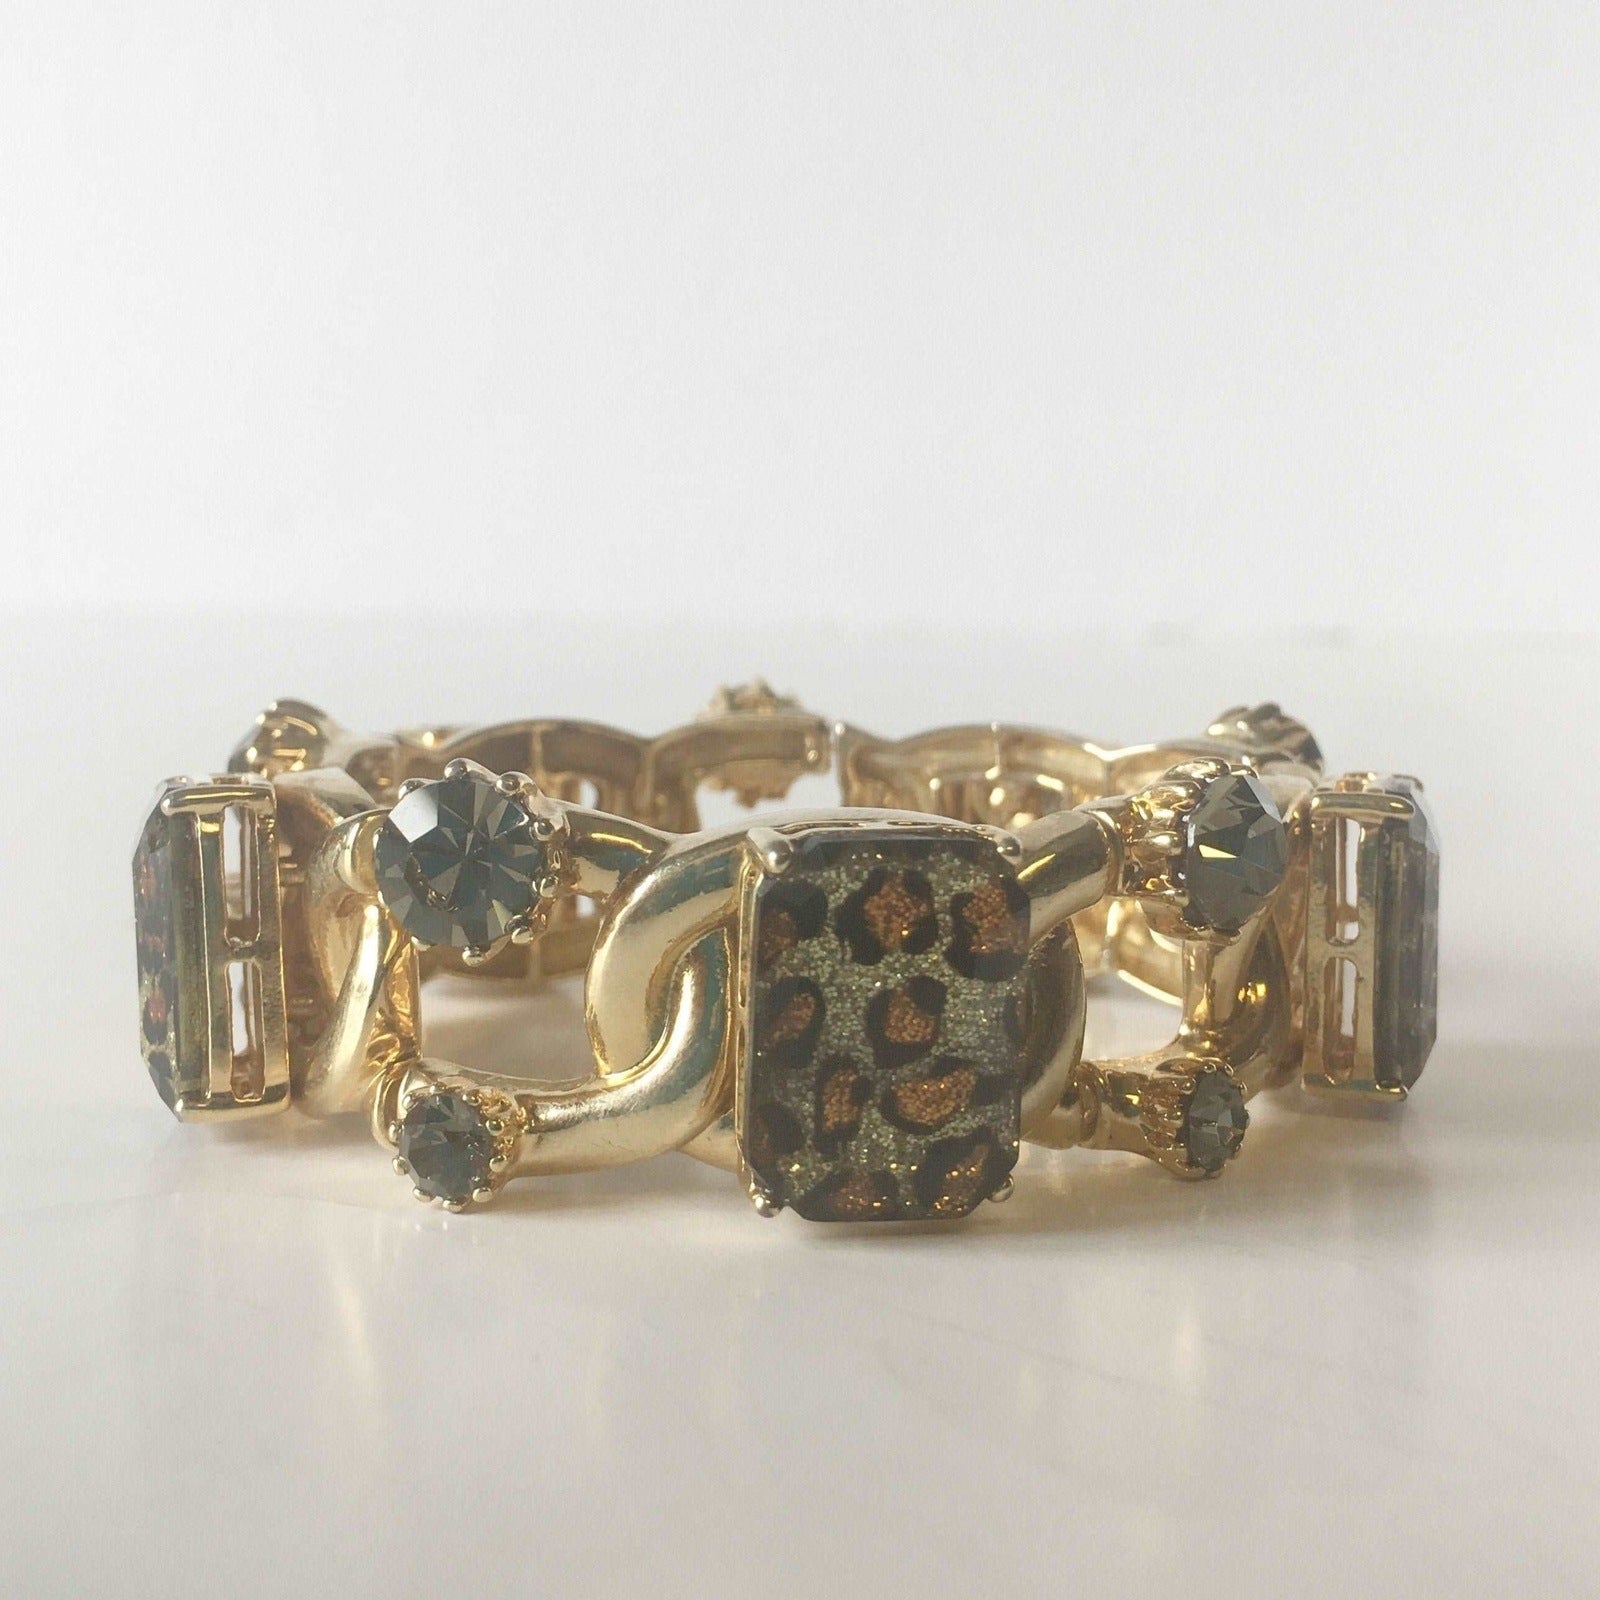 Betsey Johnson Cheetah Print Bracelet - A Contemporary Statement in Fashion Jewelry